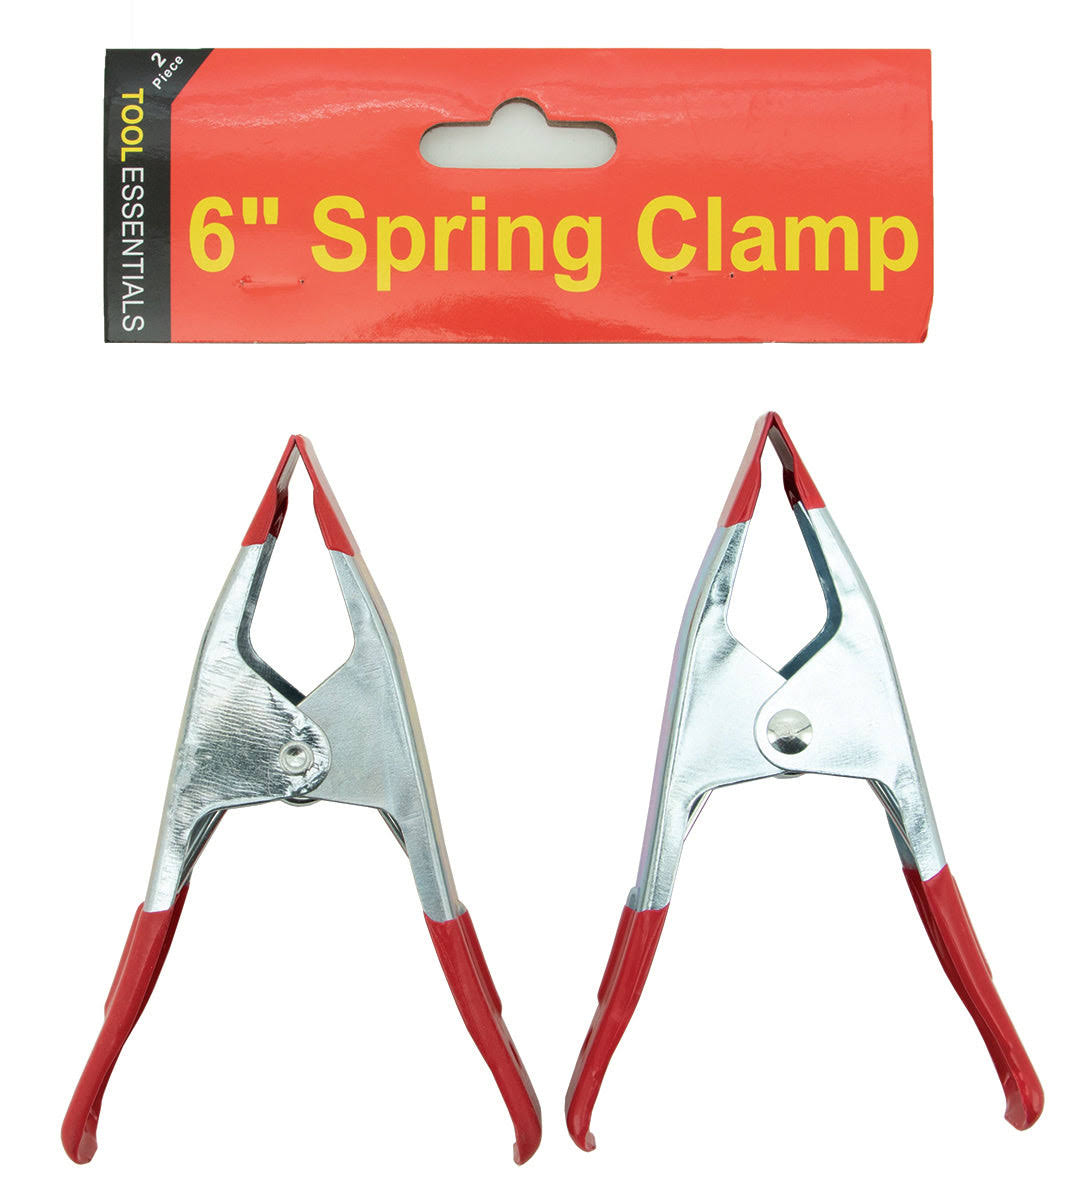 Tool Essentials 2pc 6" Metal Spring Clamp with Non Marring PVC Grips & Tips